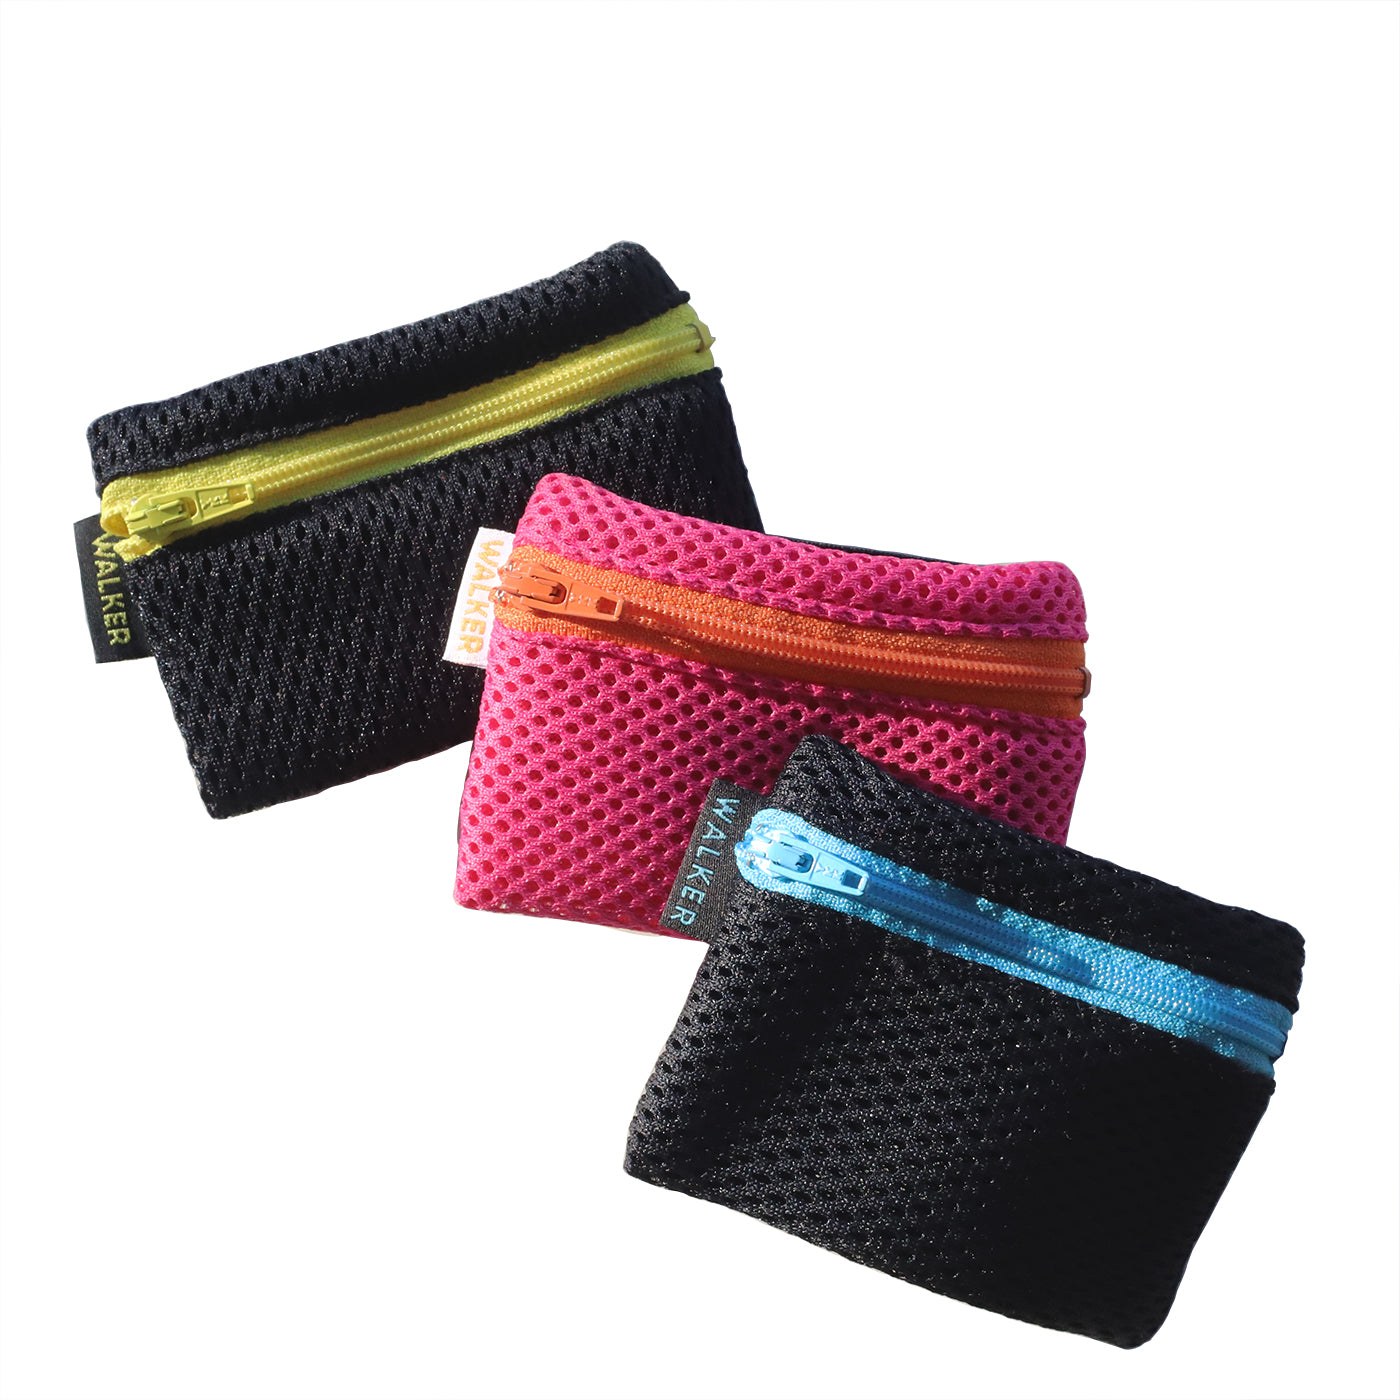 Wrist Pouch & Arm Gusset with Contrasting Zipper